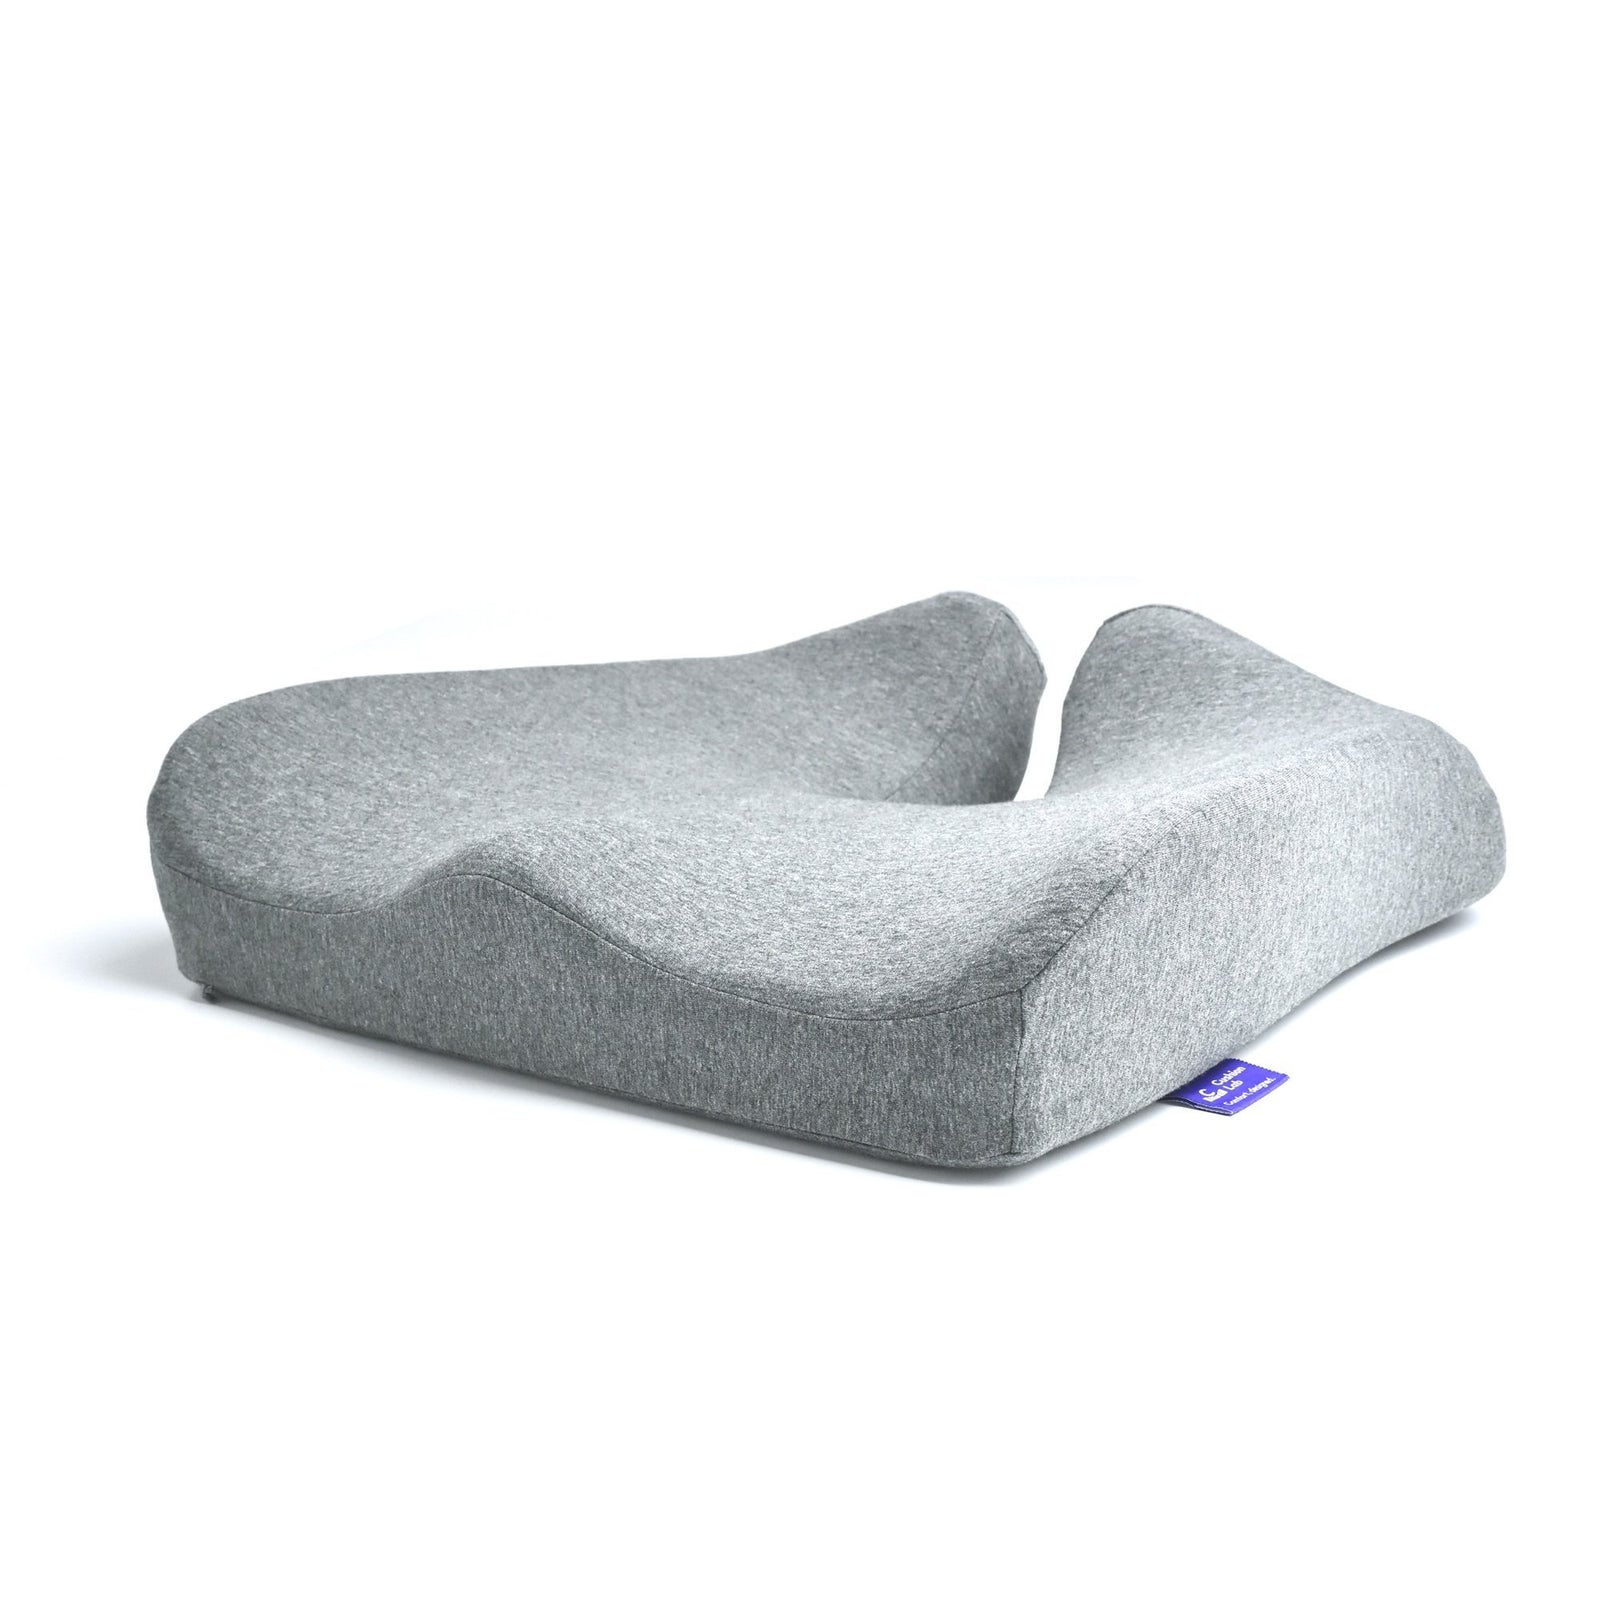 Up To 40% Off on Lumbar Support Pillow Memory